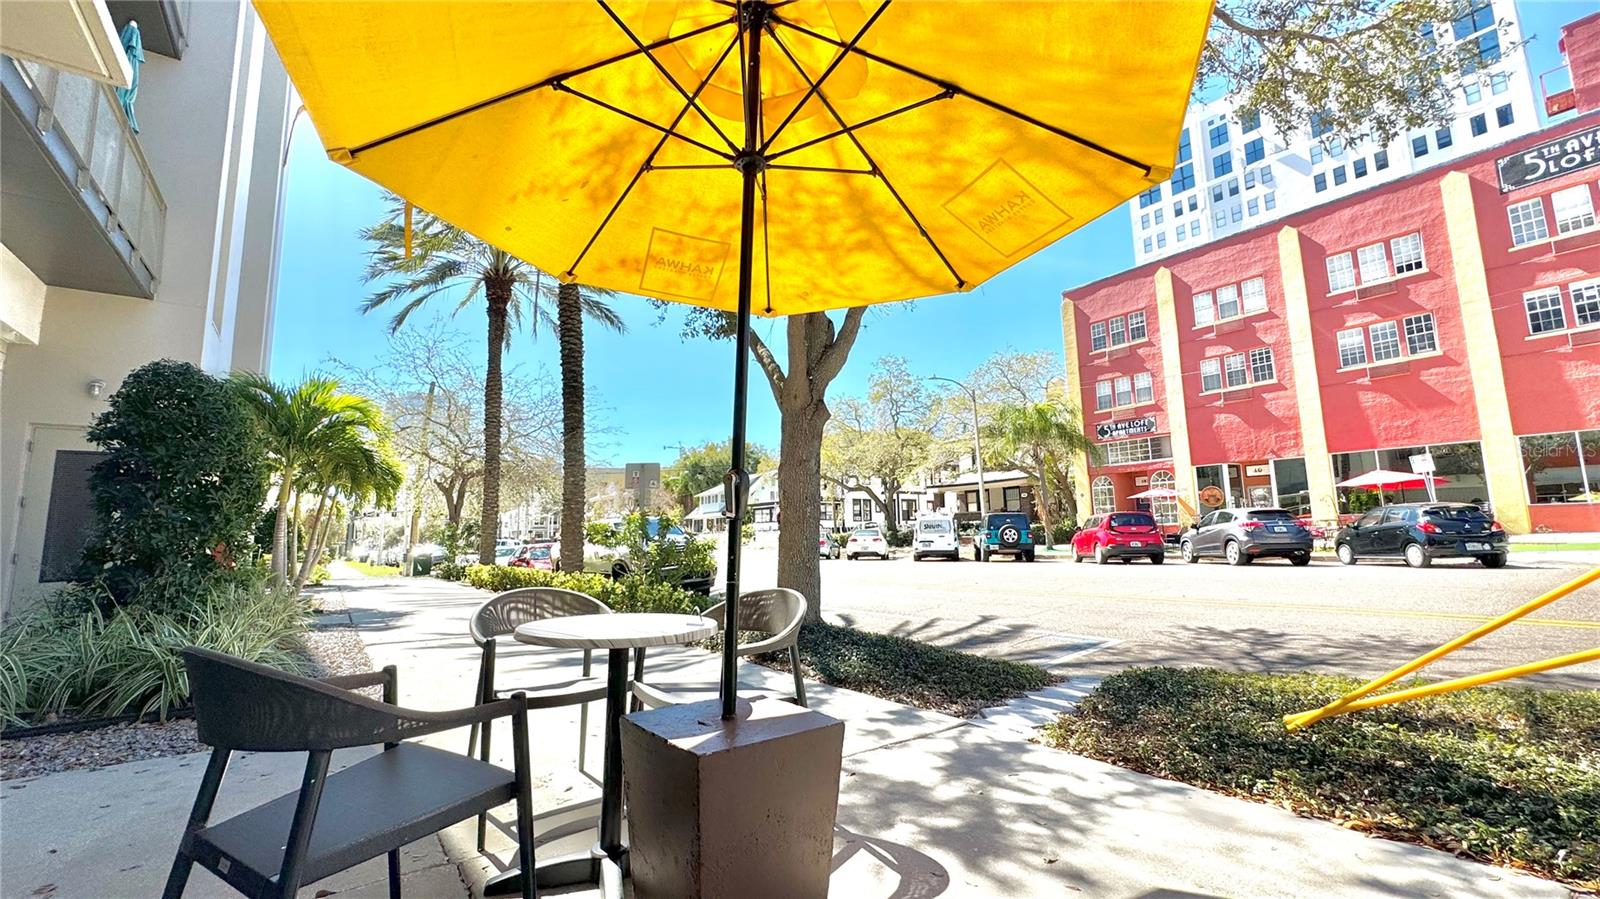 Downtown St Petersburg is renowned and much loved for its bistro-style outdoor eateries and coffee shops, just like this one!